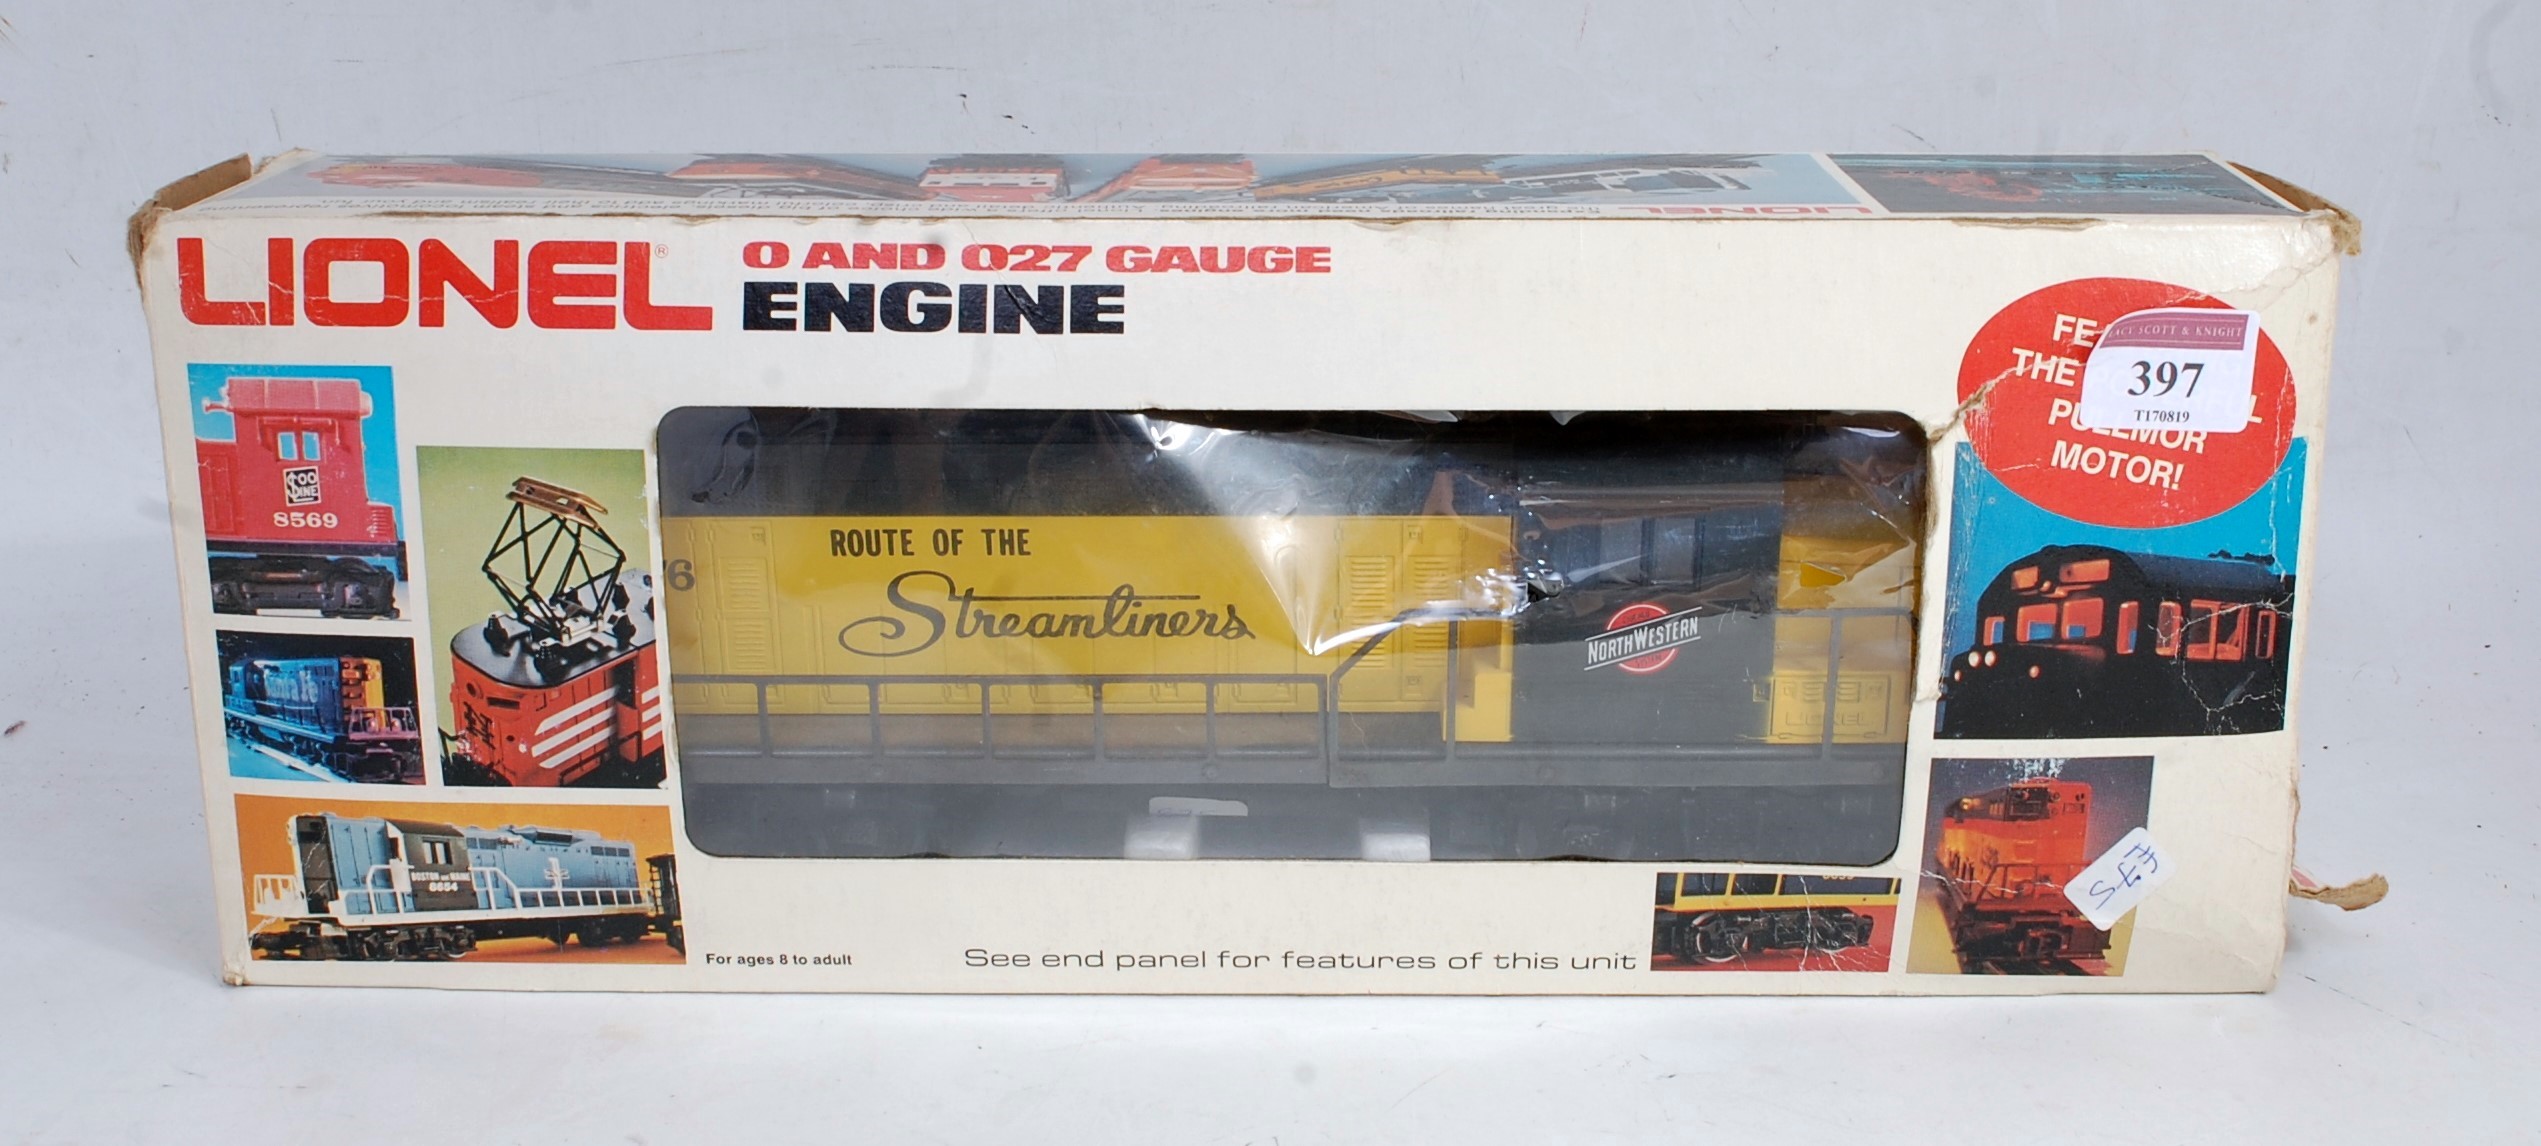 Lionel 'C&NW' GP-20 Bo-Bo diesel loco 'Route of the Streamliners' running No. 8776 Ref. 6-8776 (VG-